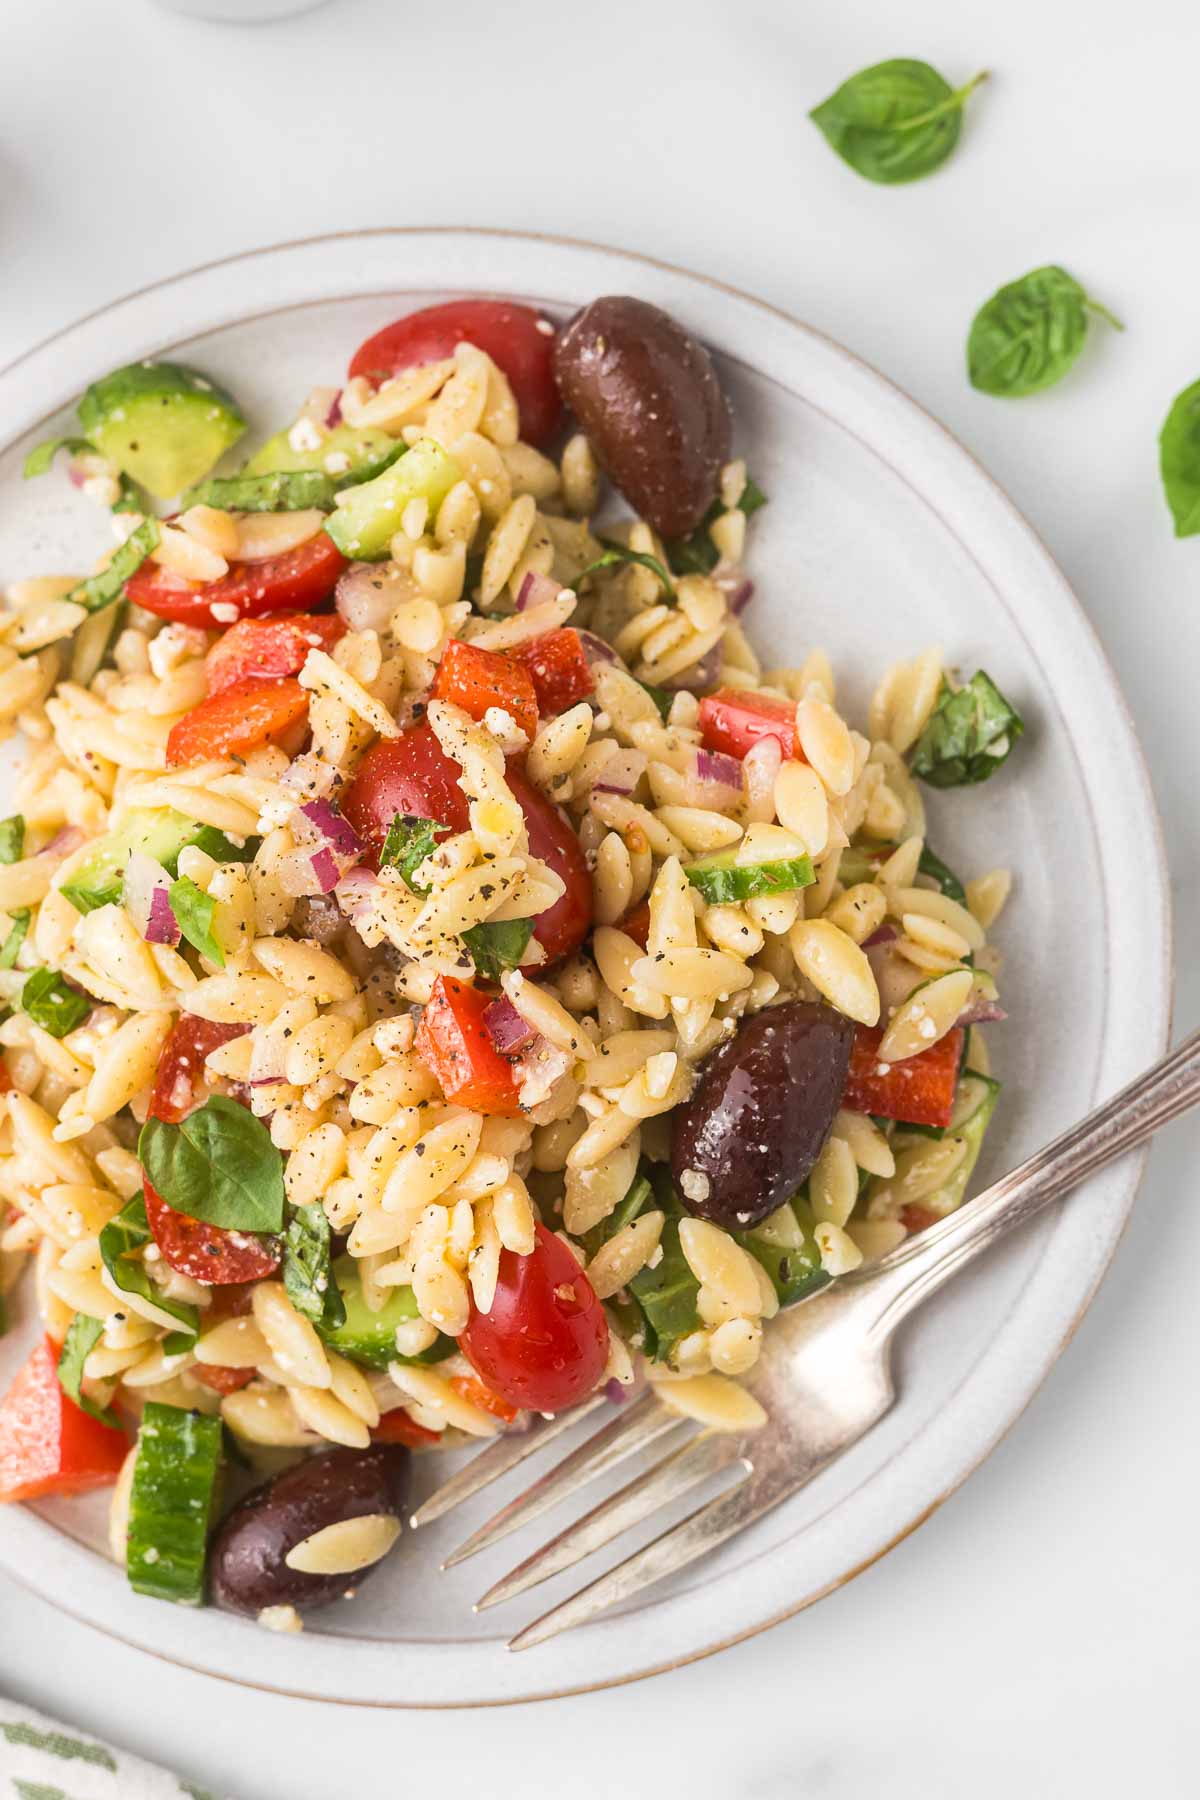 Orzo salad on a plate with a fork.